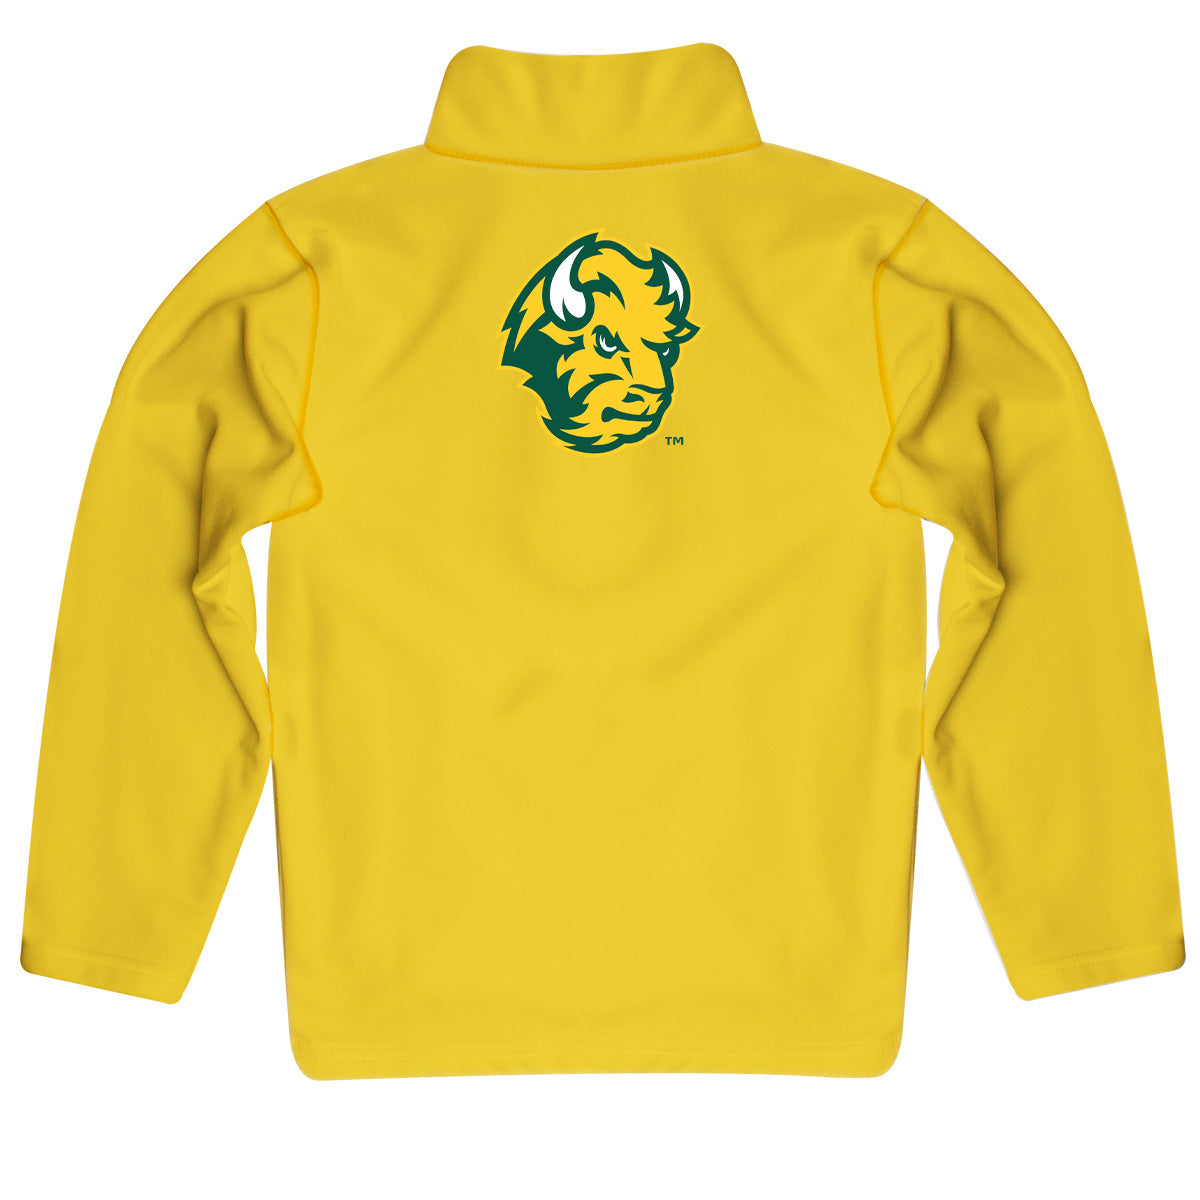 North Dakota Bison Game Day Solid Yellow Quarter Zip Pullover for Infants Toddlers by Vive La Fete